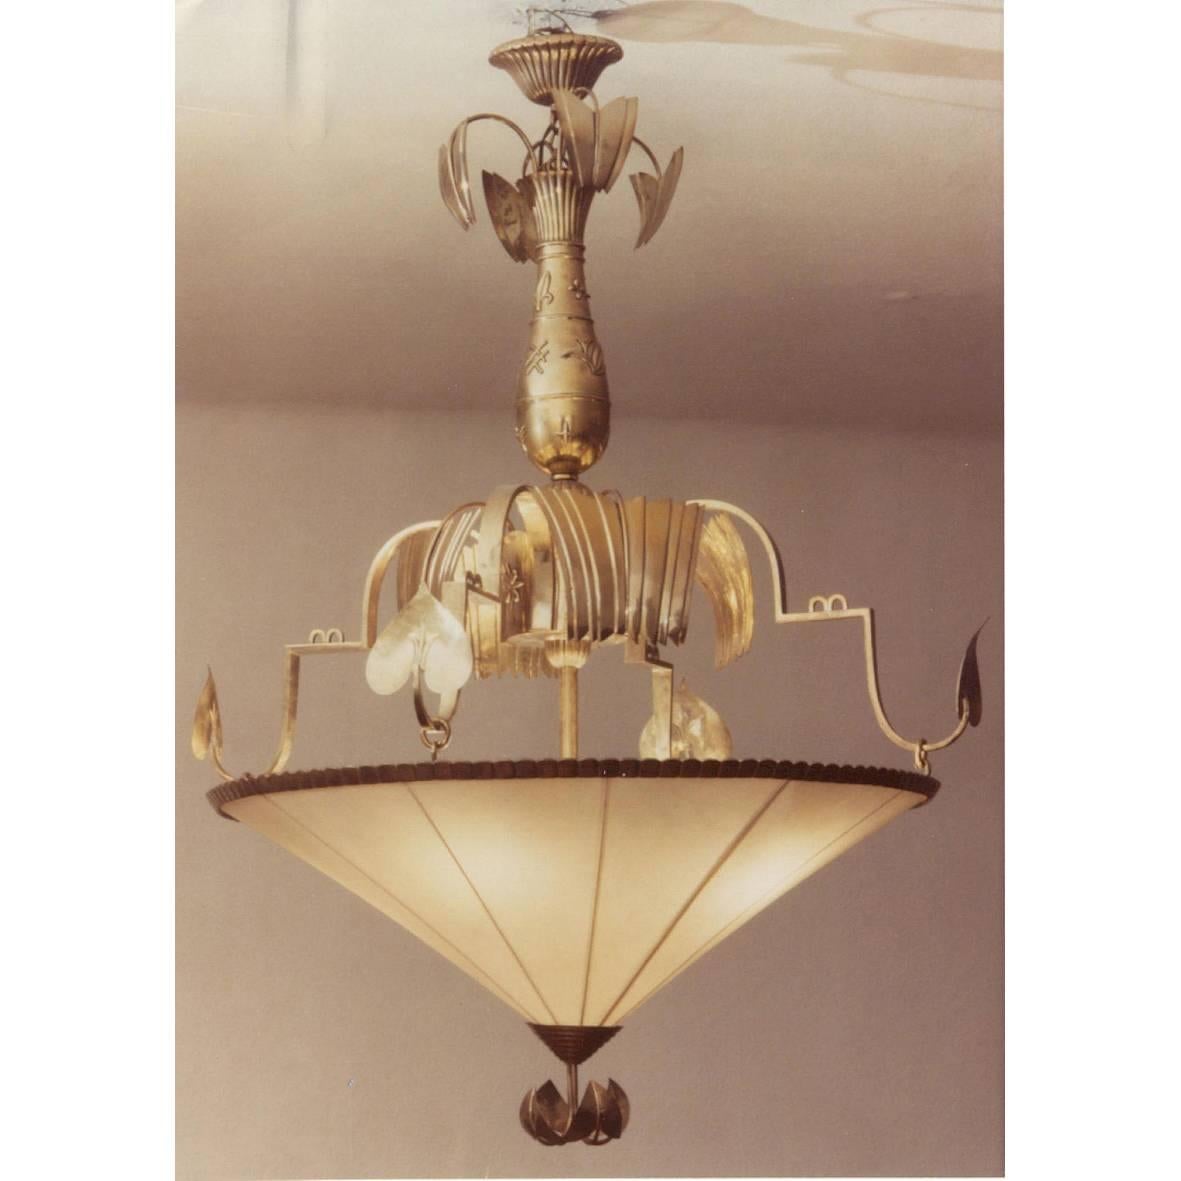 Originally owned by Woka, the lamp has been sold at the Viennese auction-house 